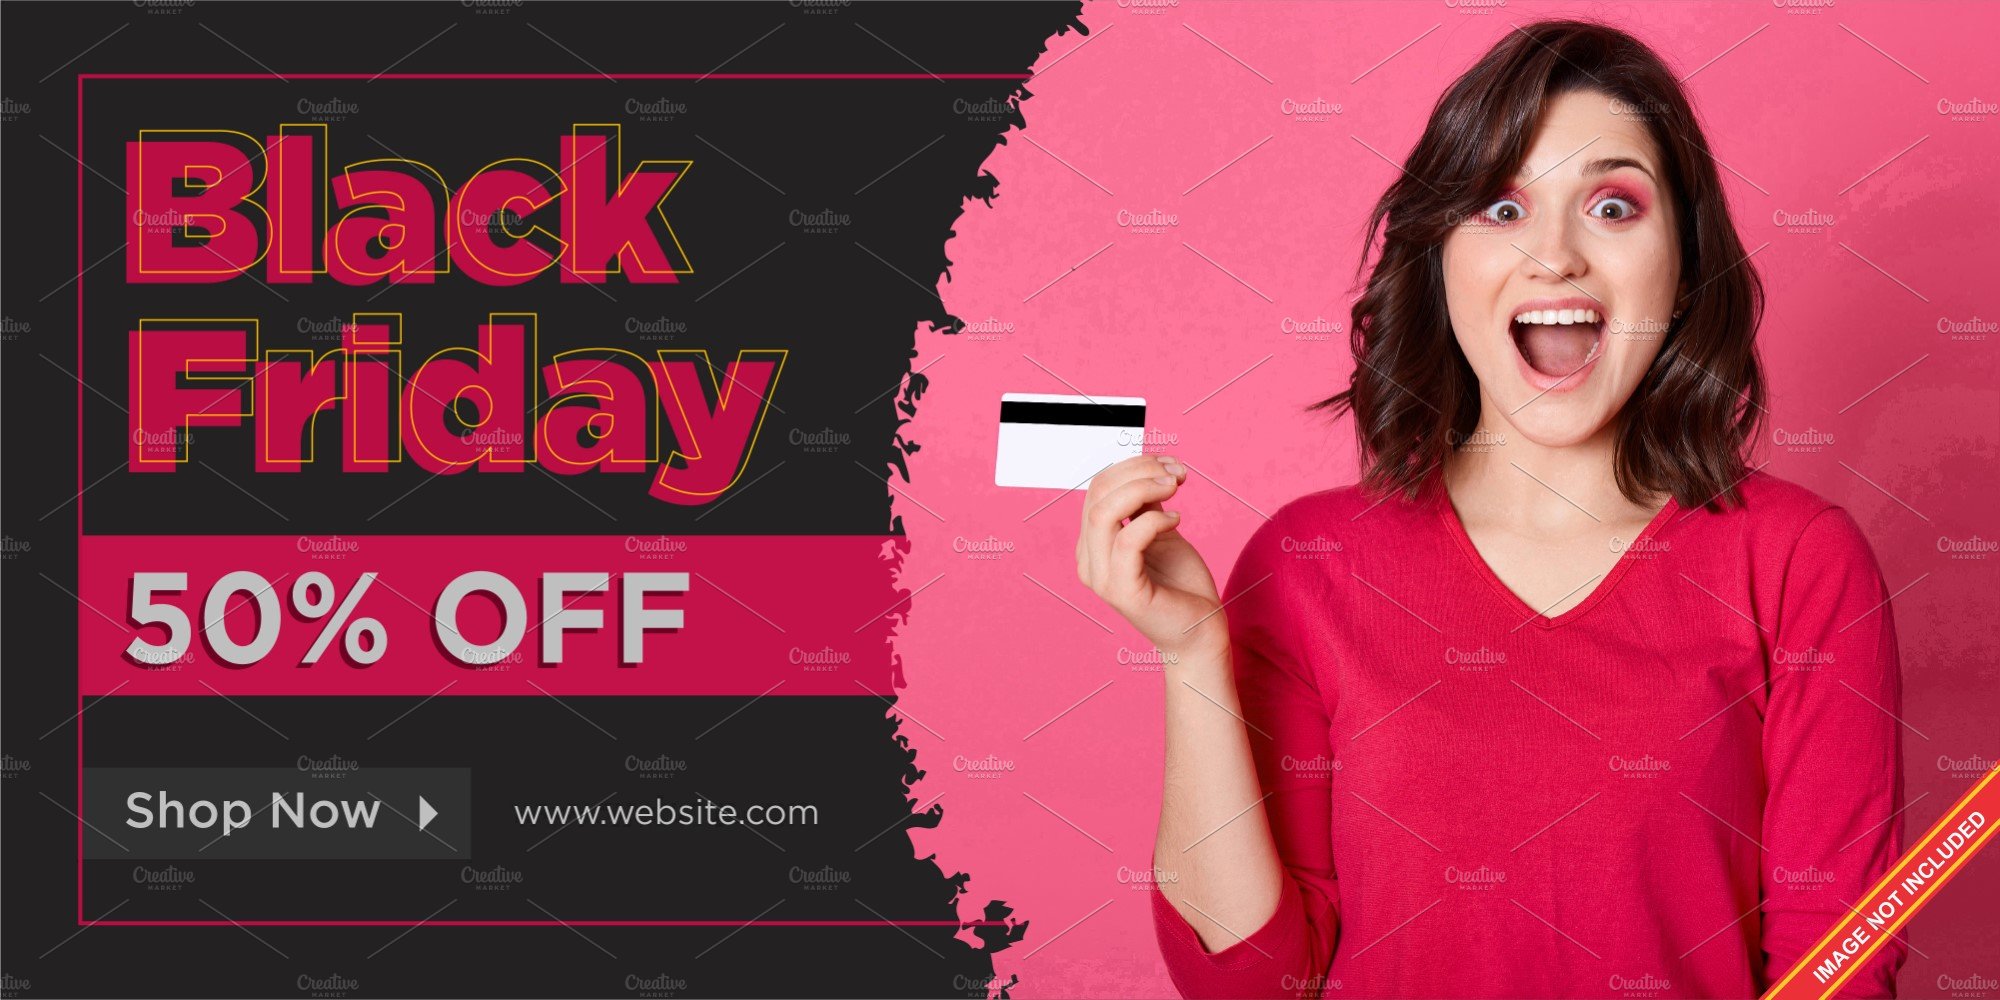 Black friday sale banners with 50% off.